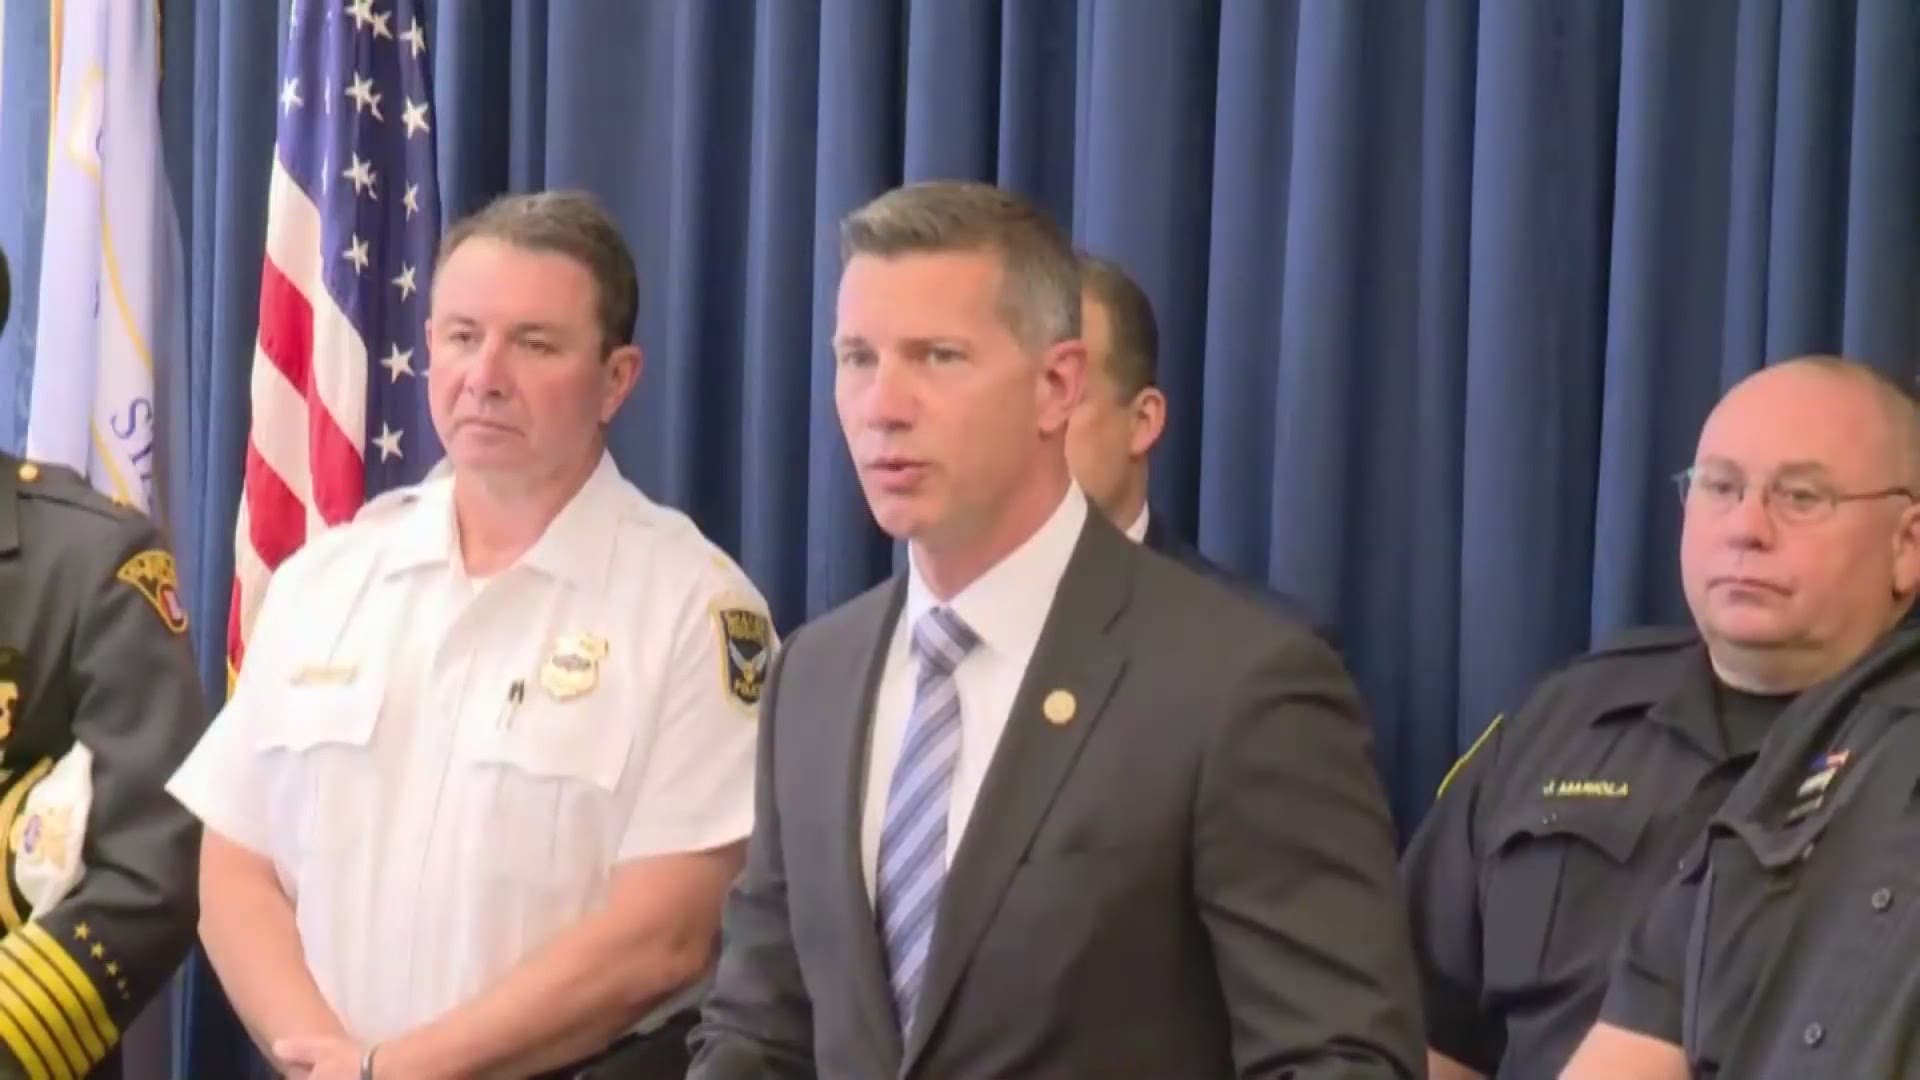 Aug. 29, 2019: Eric Smith of the FBI discusses the case involving James Reardon, who is in federal custody for alleged threats against the Jewish Community Center of Youngstown. Smith provided a list of the weapons that were found at Reardon's home when authorities executed a search warrant earlier this month.